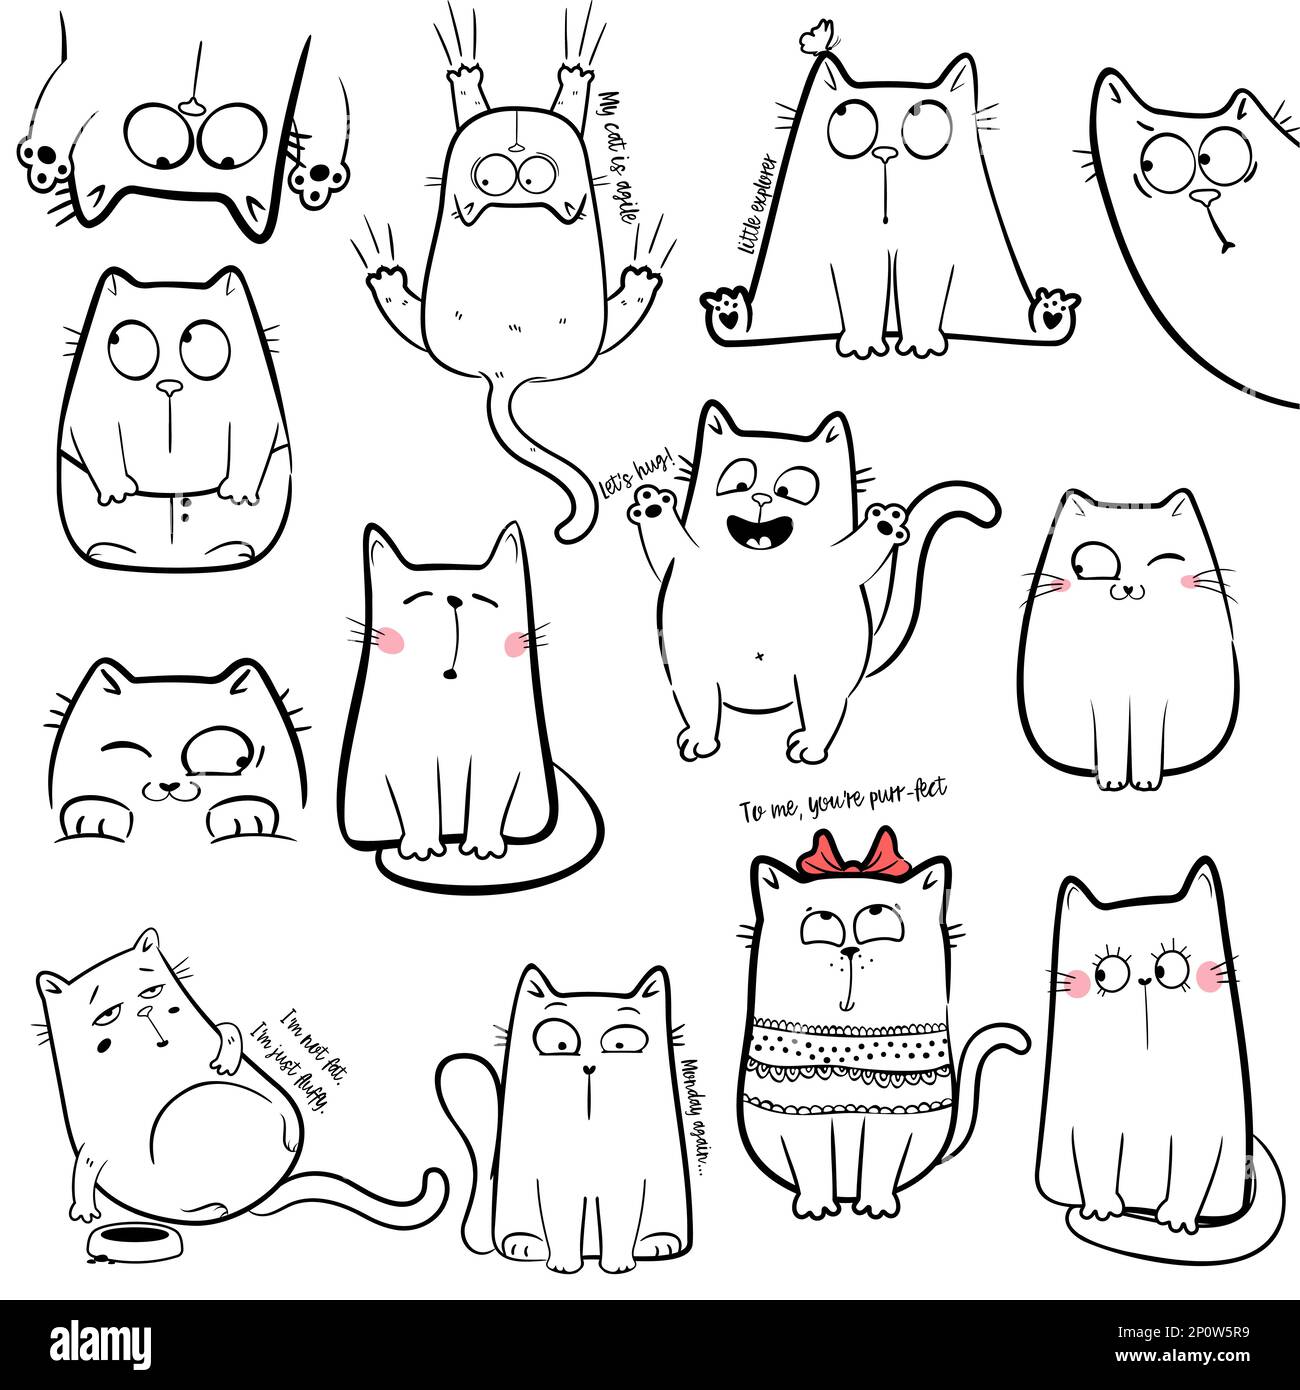 Cute cat doodle banner background wallpaper icon cartoon